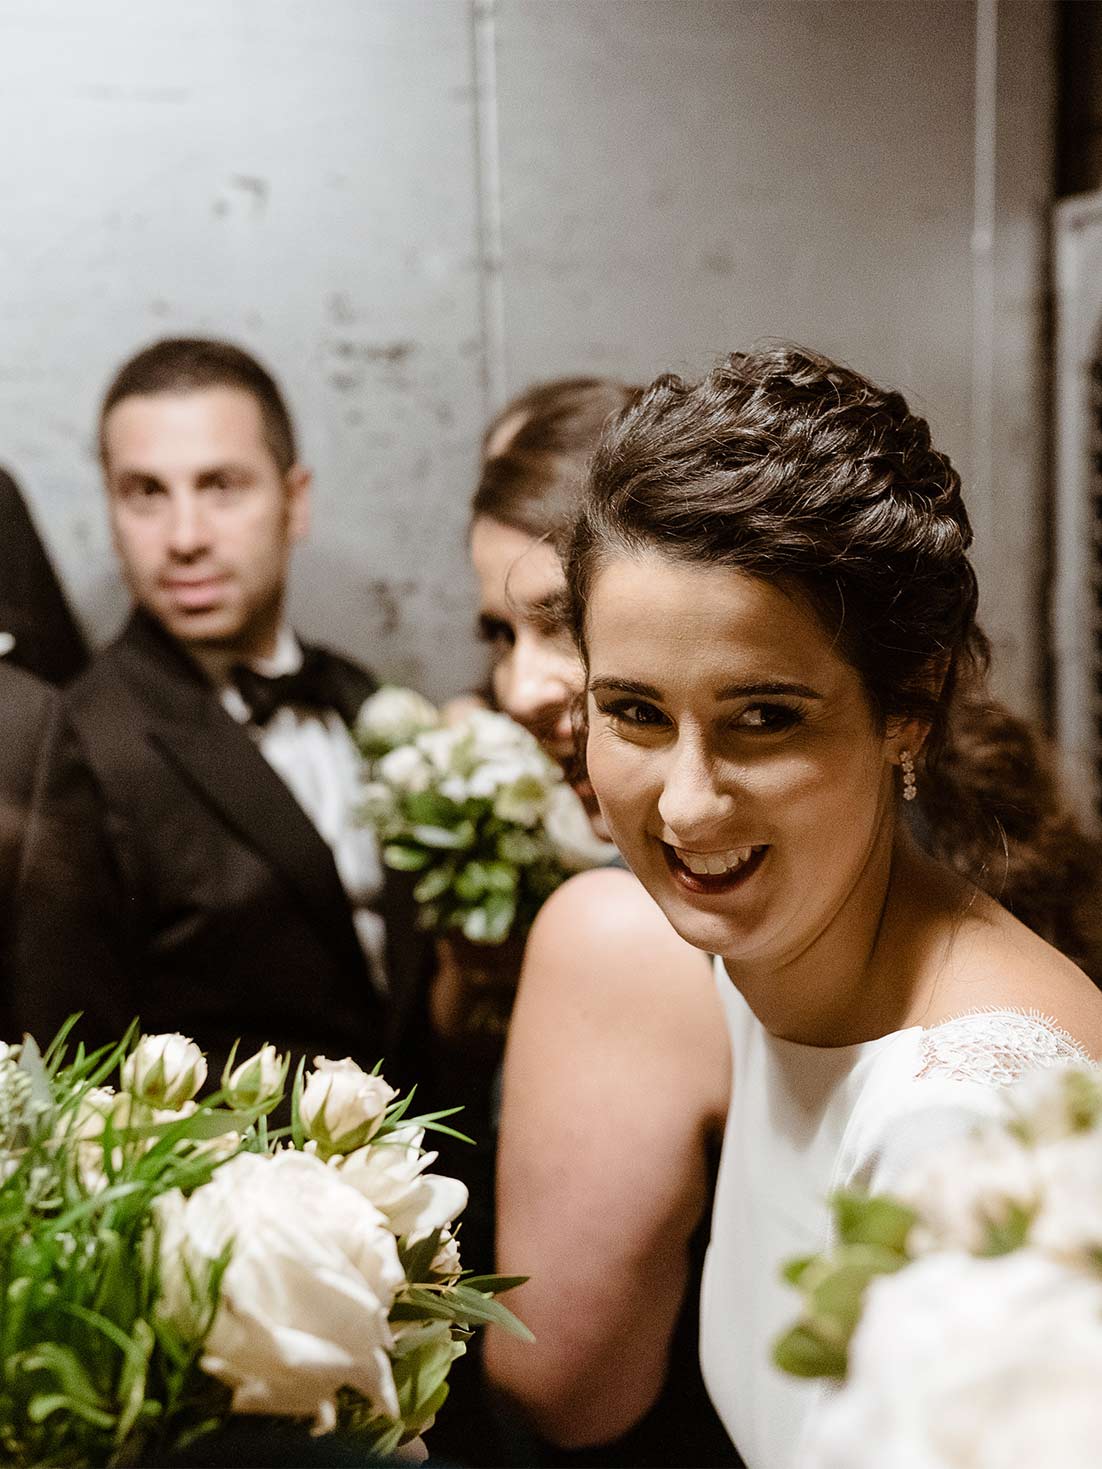 Bride smiles as bridal party rides in an industrial service freight to enter the westchester wedding venue